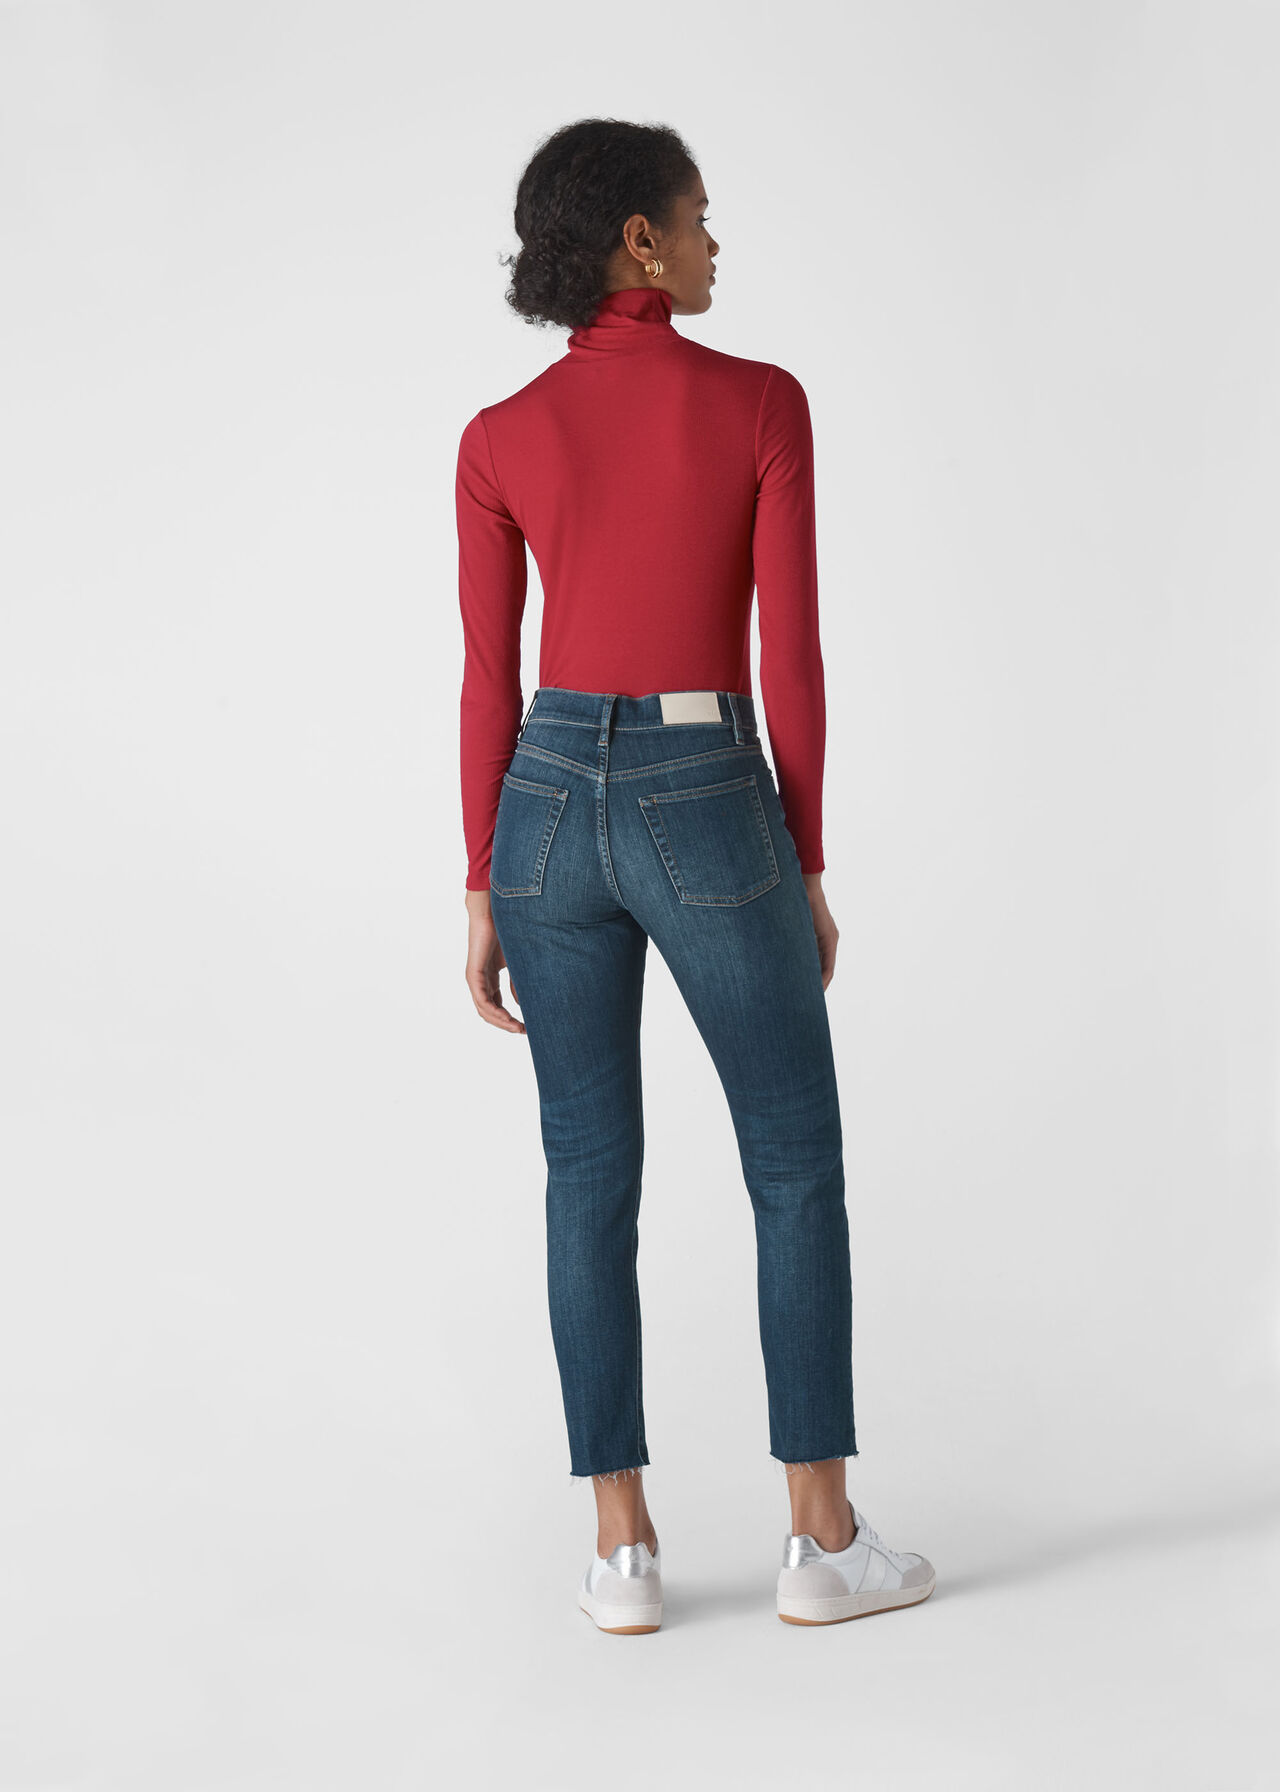 Essential Polo Neck Red